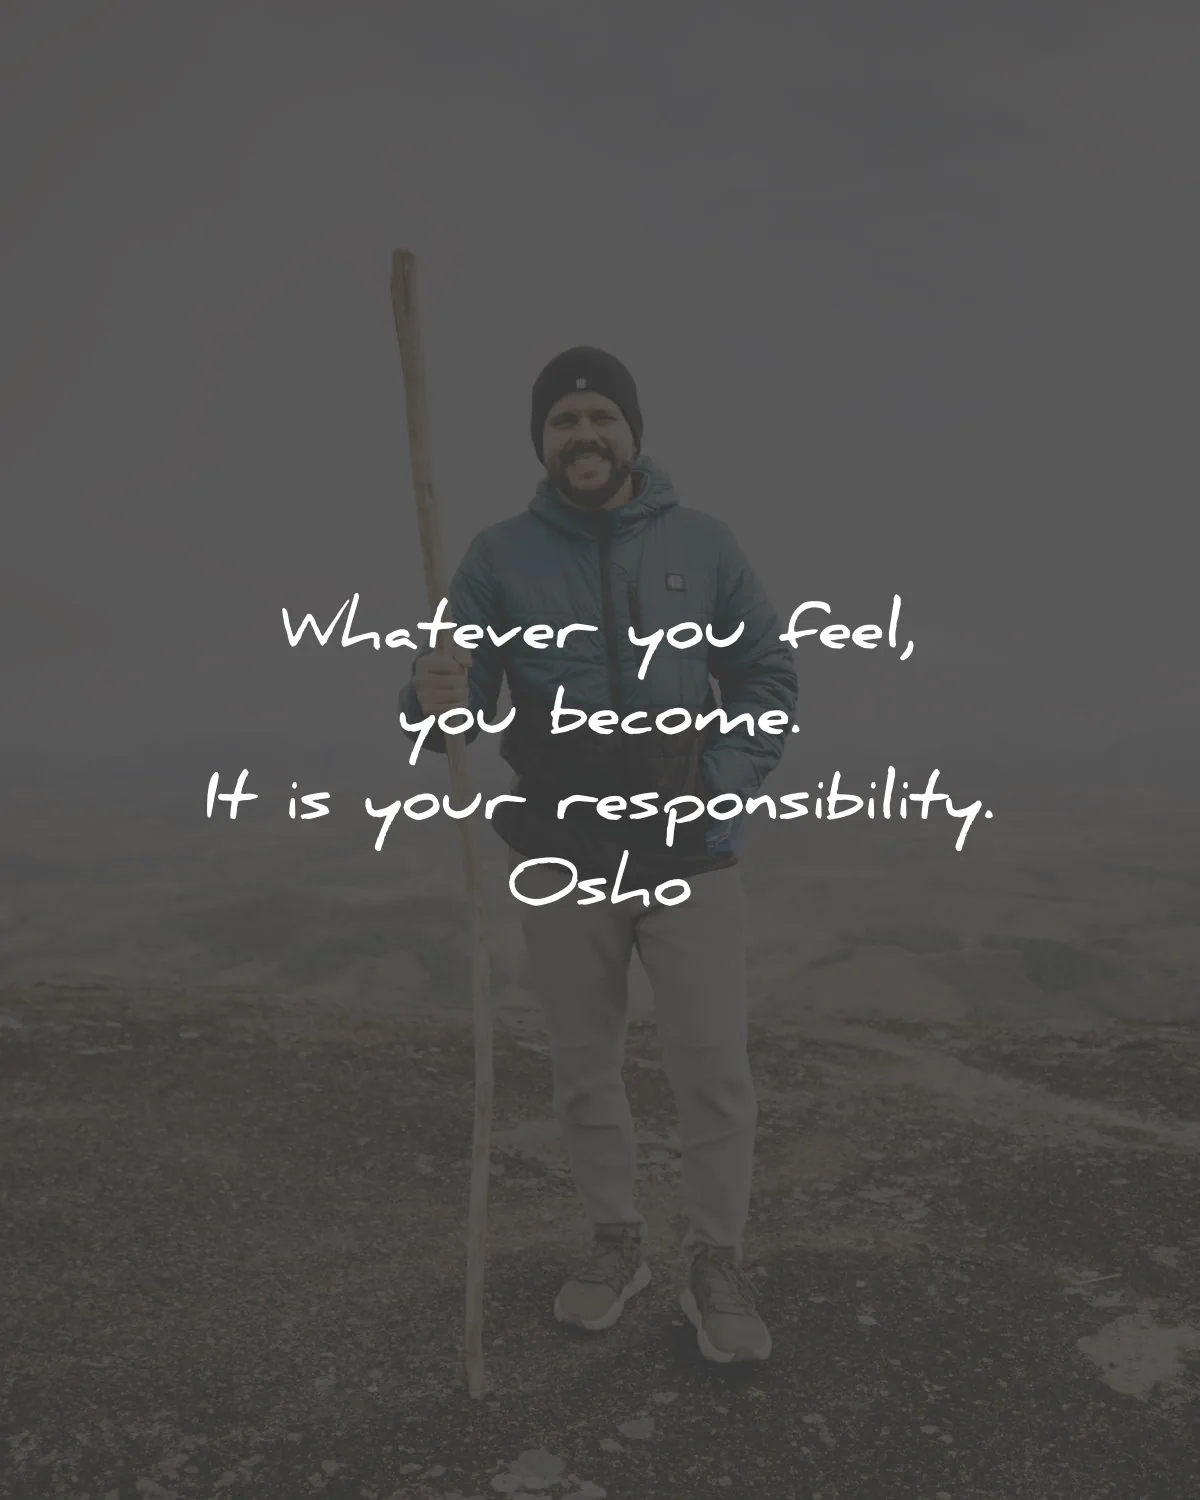 deep quotes whatever feel become responsibility osho wisdom